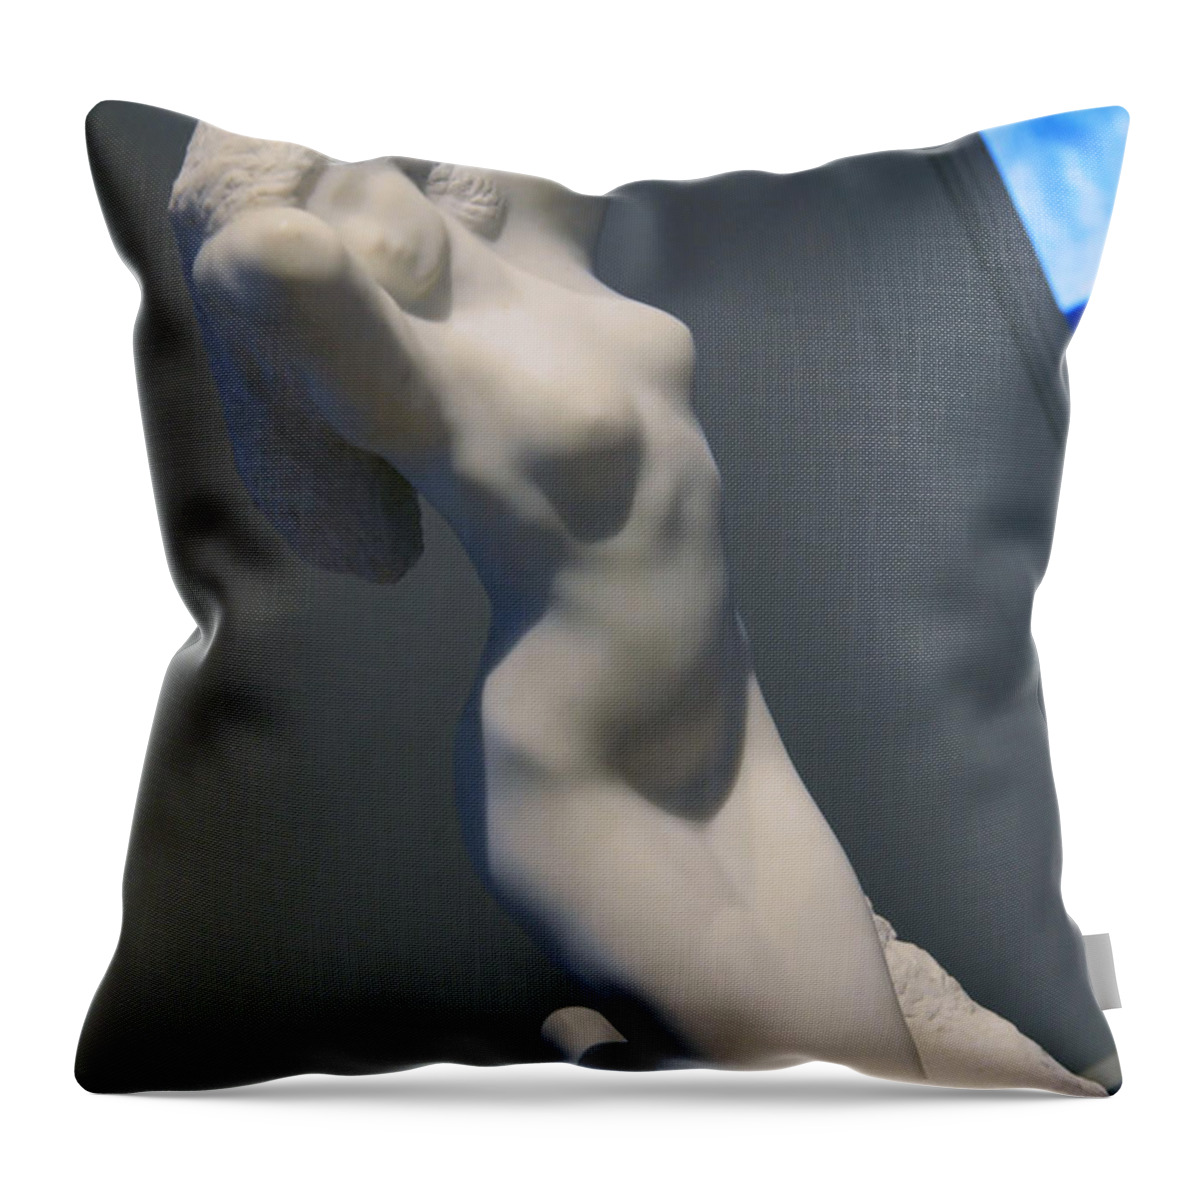 Morning Throw Pillow featuring the photograph Rodin's Morning by Cora Wandel